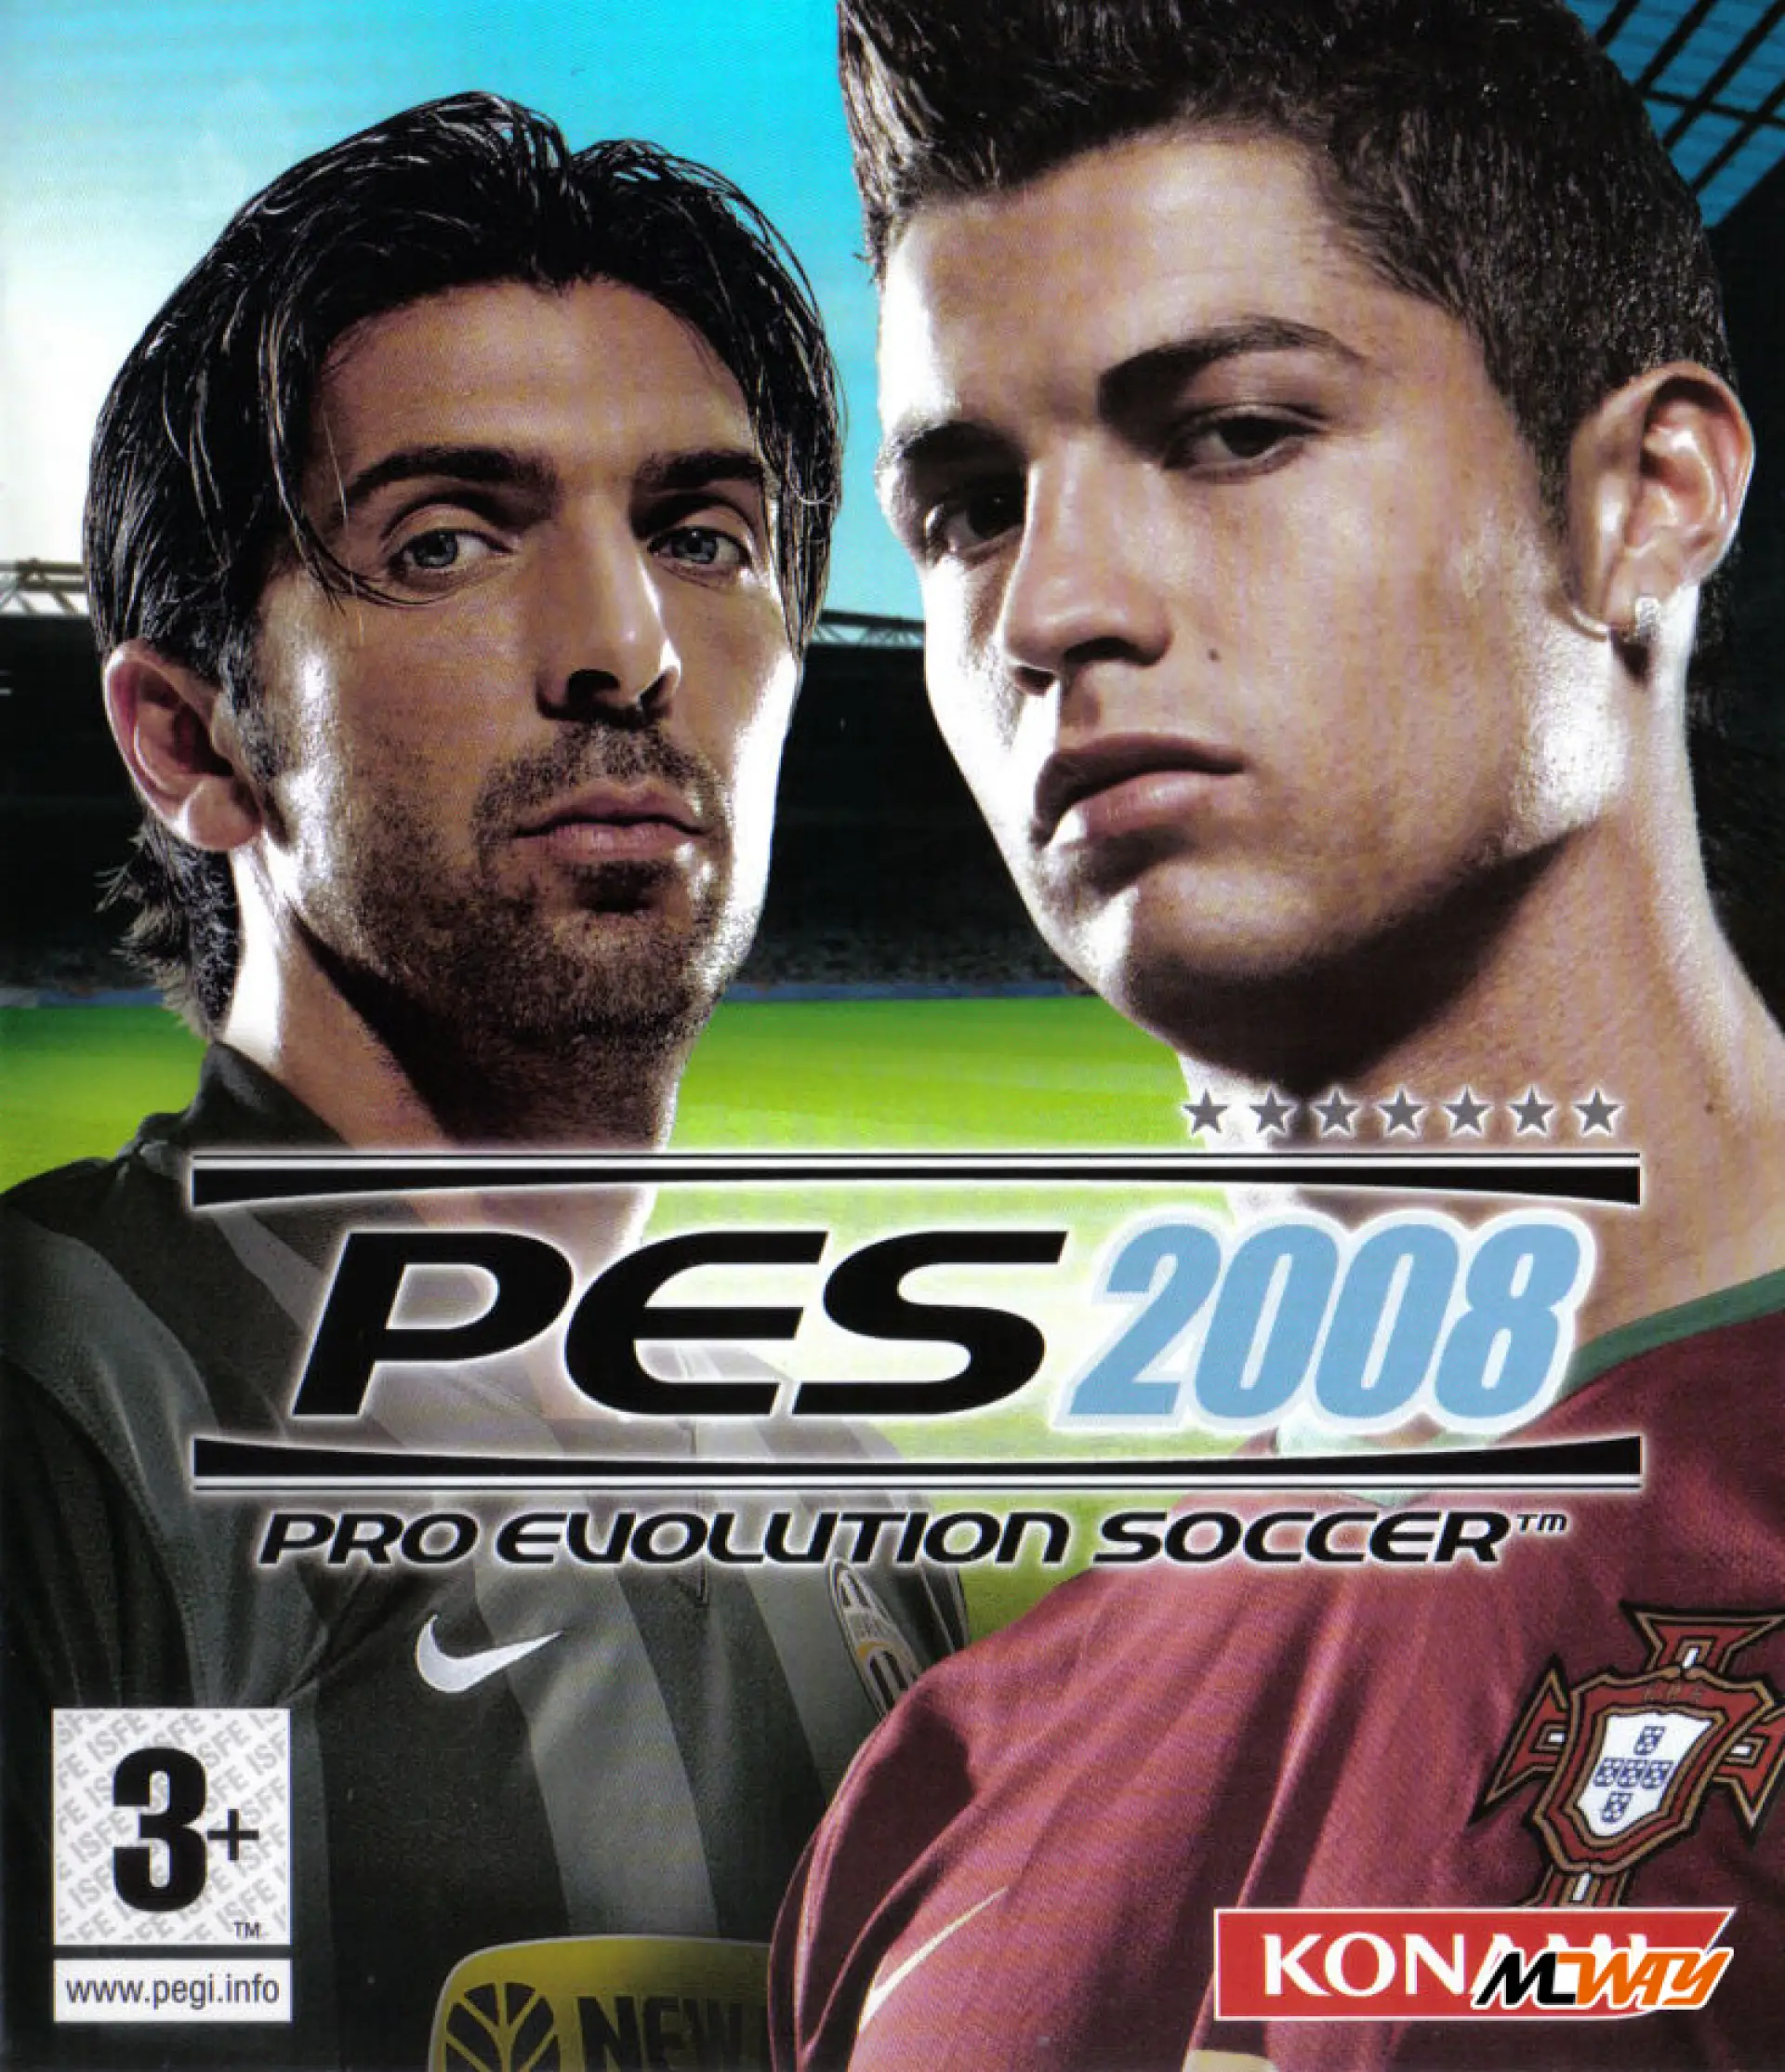 PES 2021 front cover features Cristiano Ronaldo AND Lionel Messi